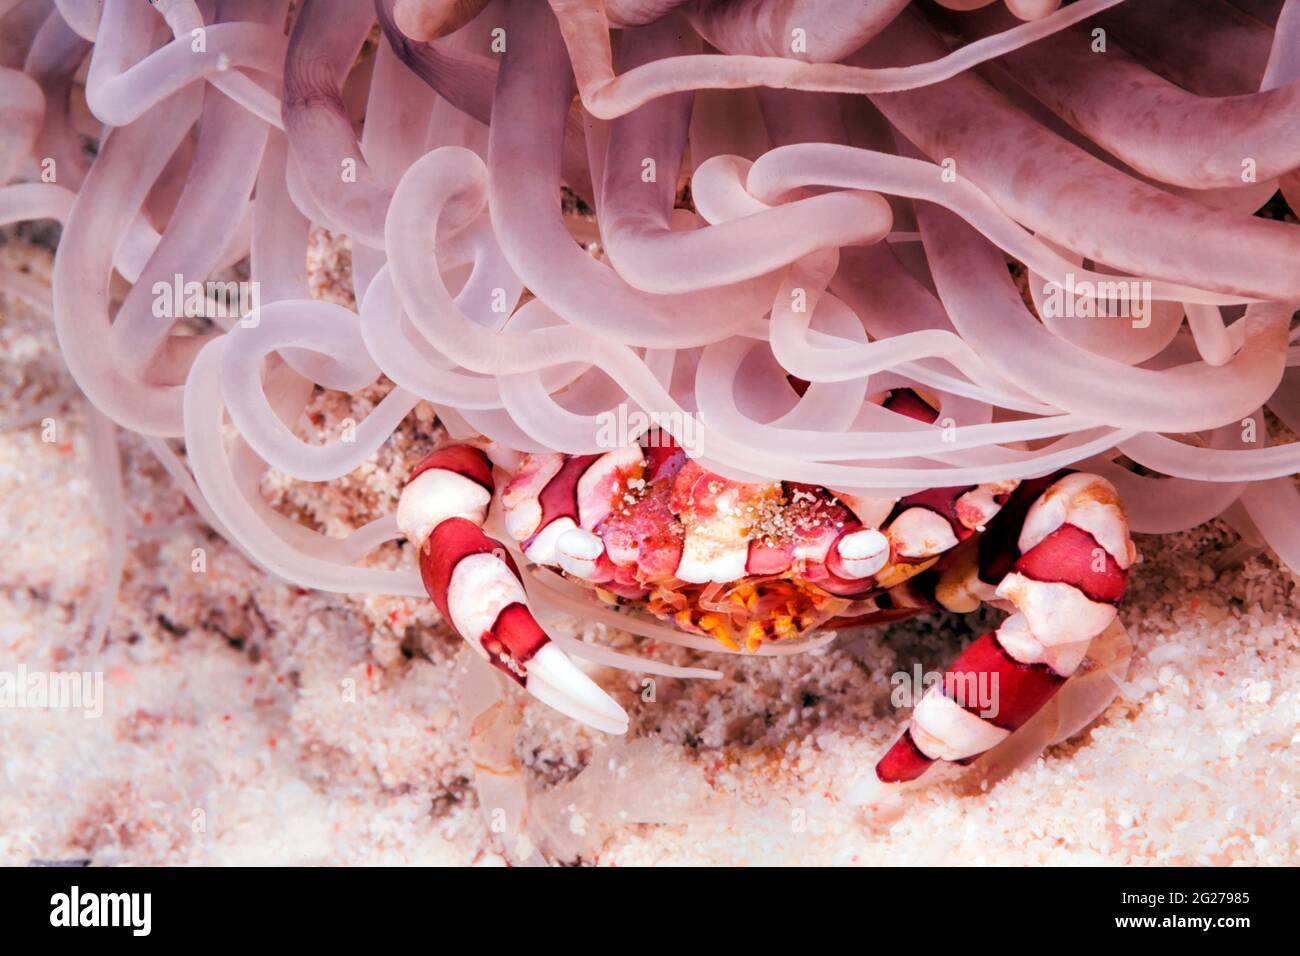 A harlequin swimming crab (Lissocarcinus laevis) hides under an anemone. Stock Photo